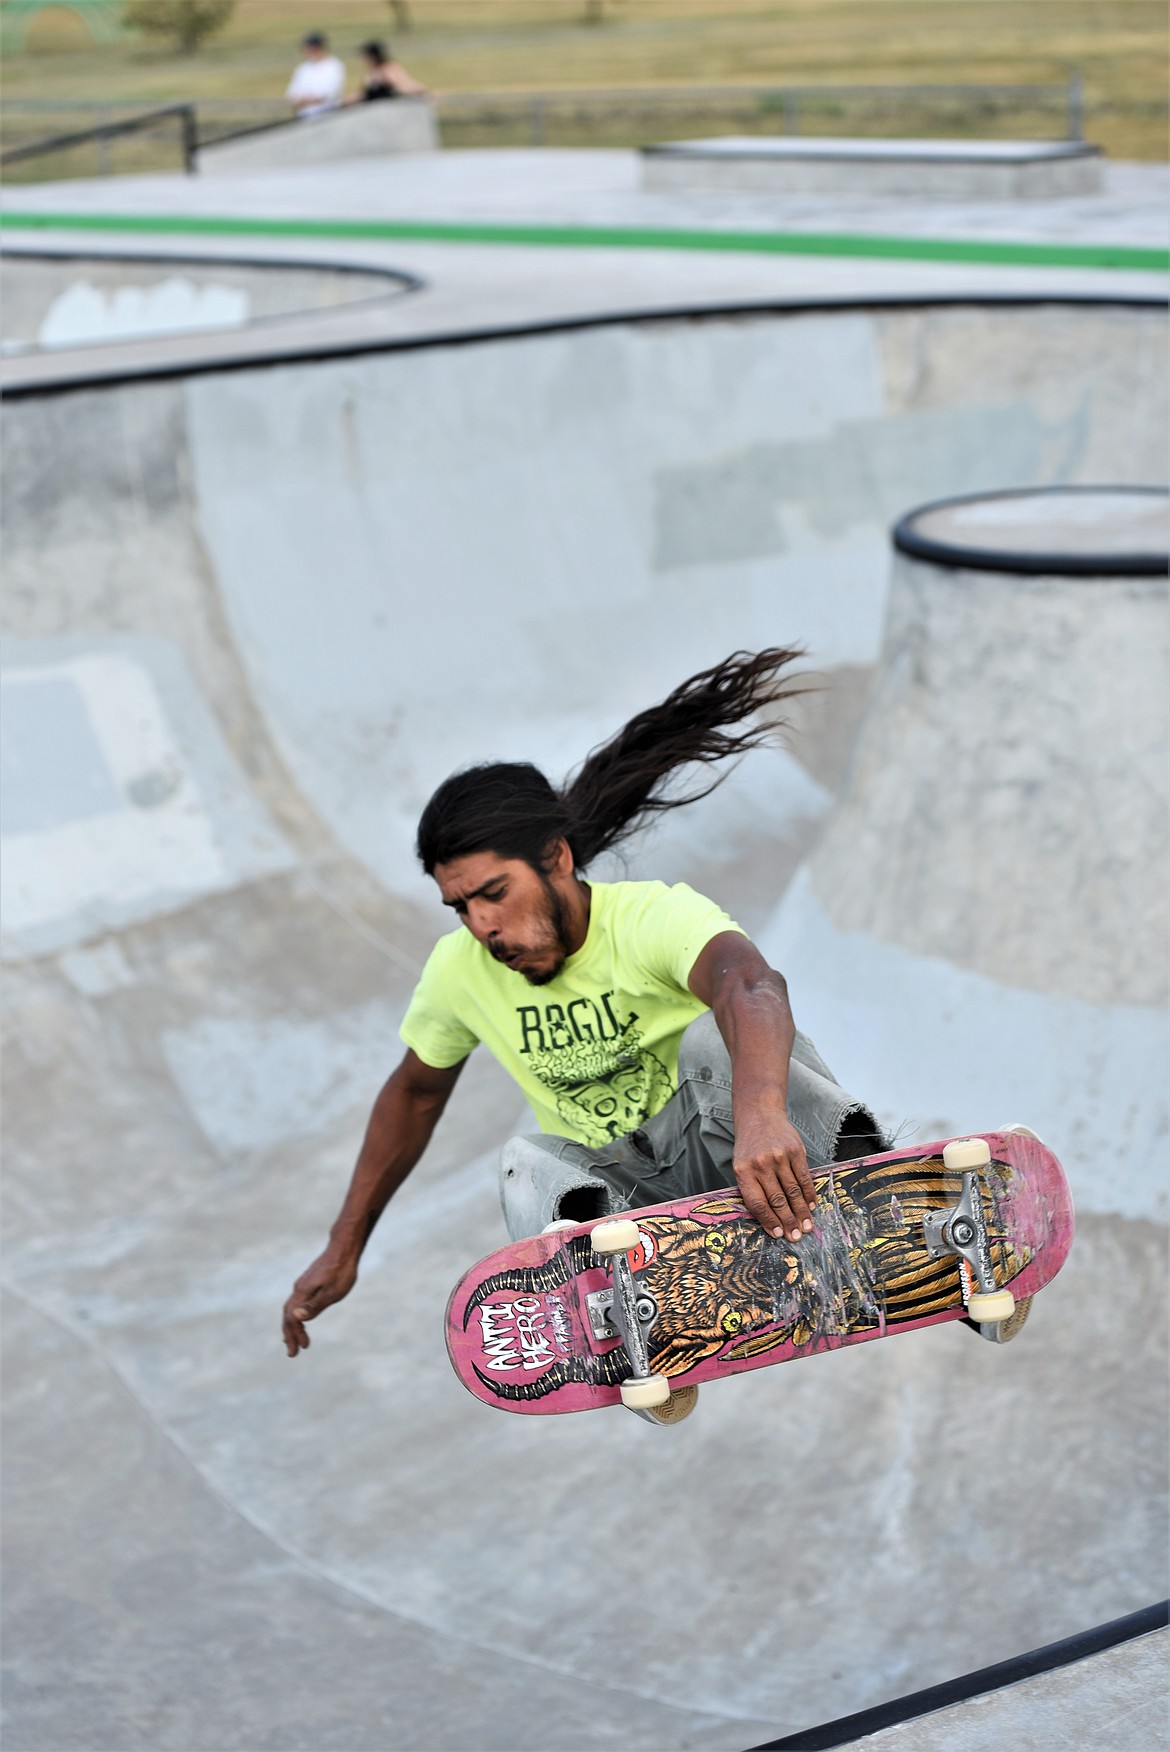 A skater catches some air off the wall of one of the park's bowls. (Scot Heisel/Lake County Leader)